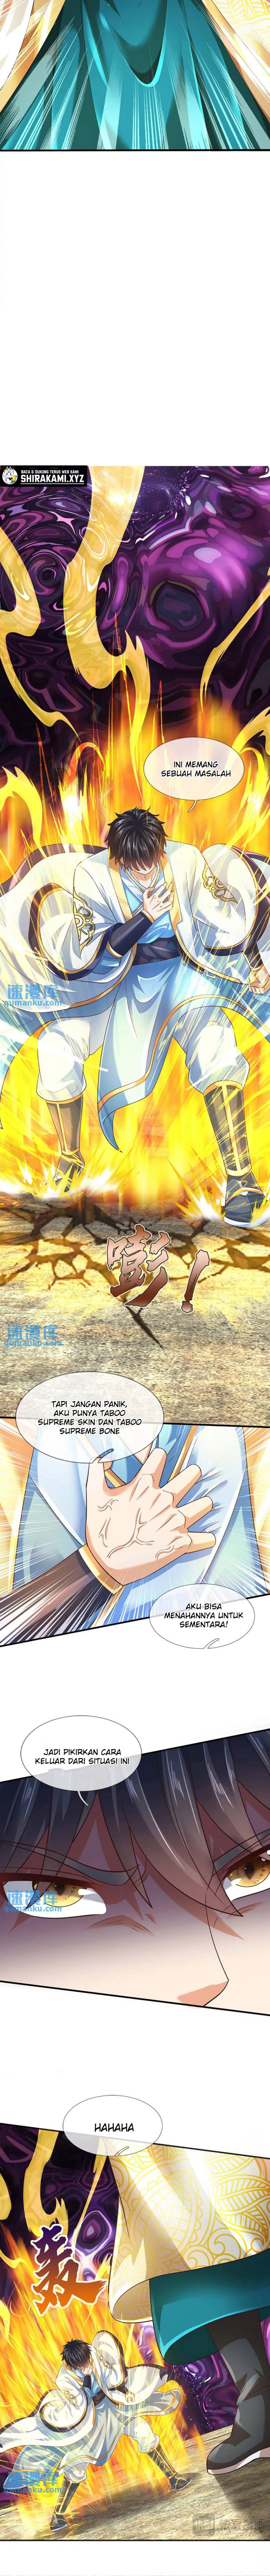 Star Sign In To Supreme Dantian Chapter 282